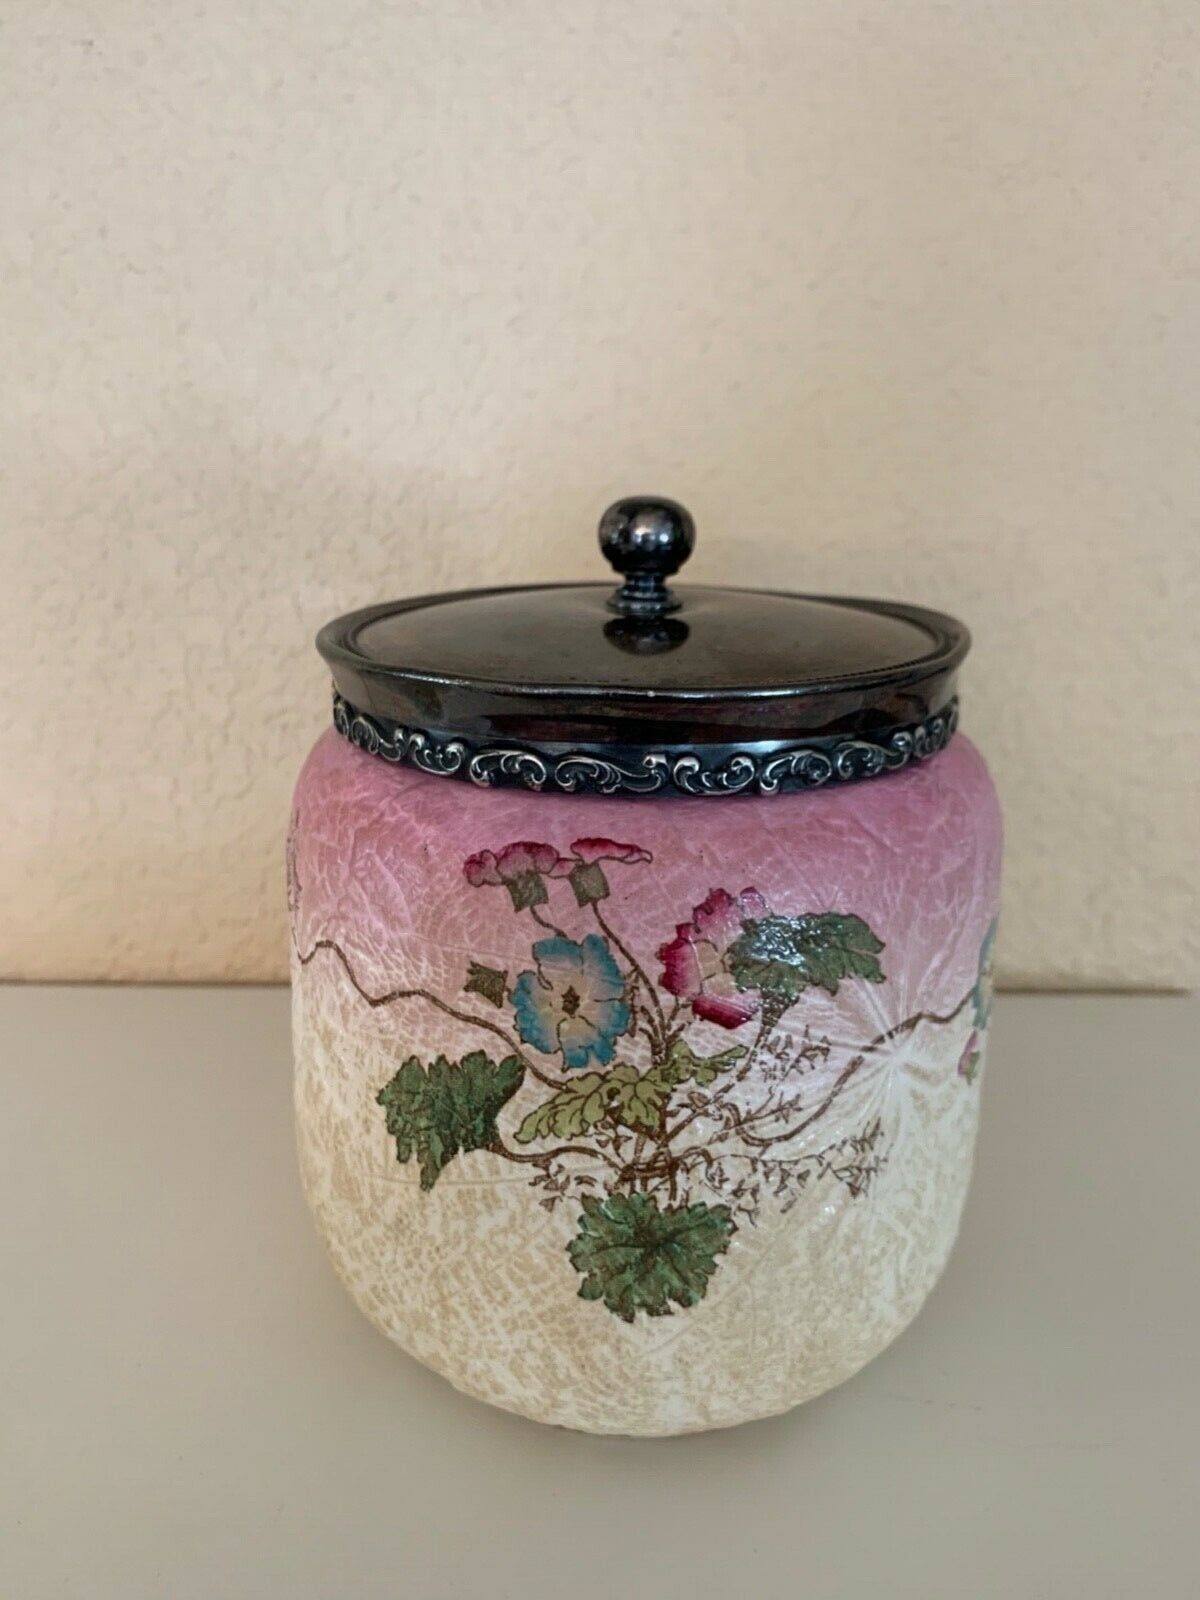 English Furnivals Pottery Cookie Biscuit Jar with Silver Lid 1880’s Old